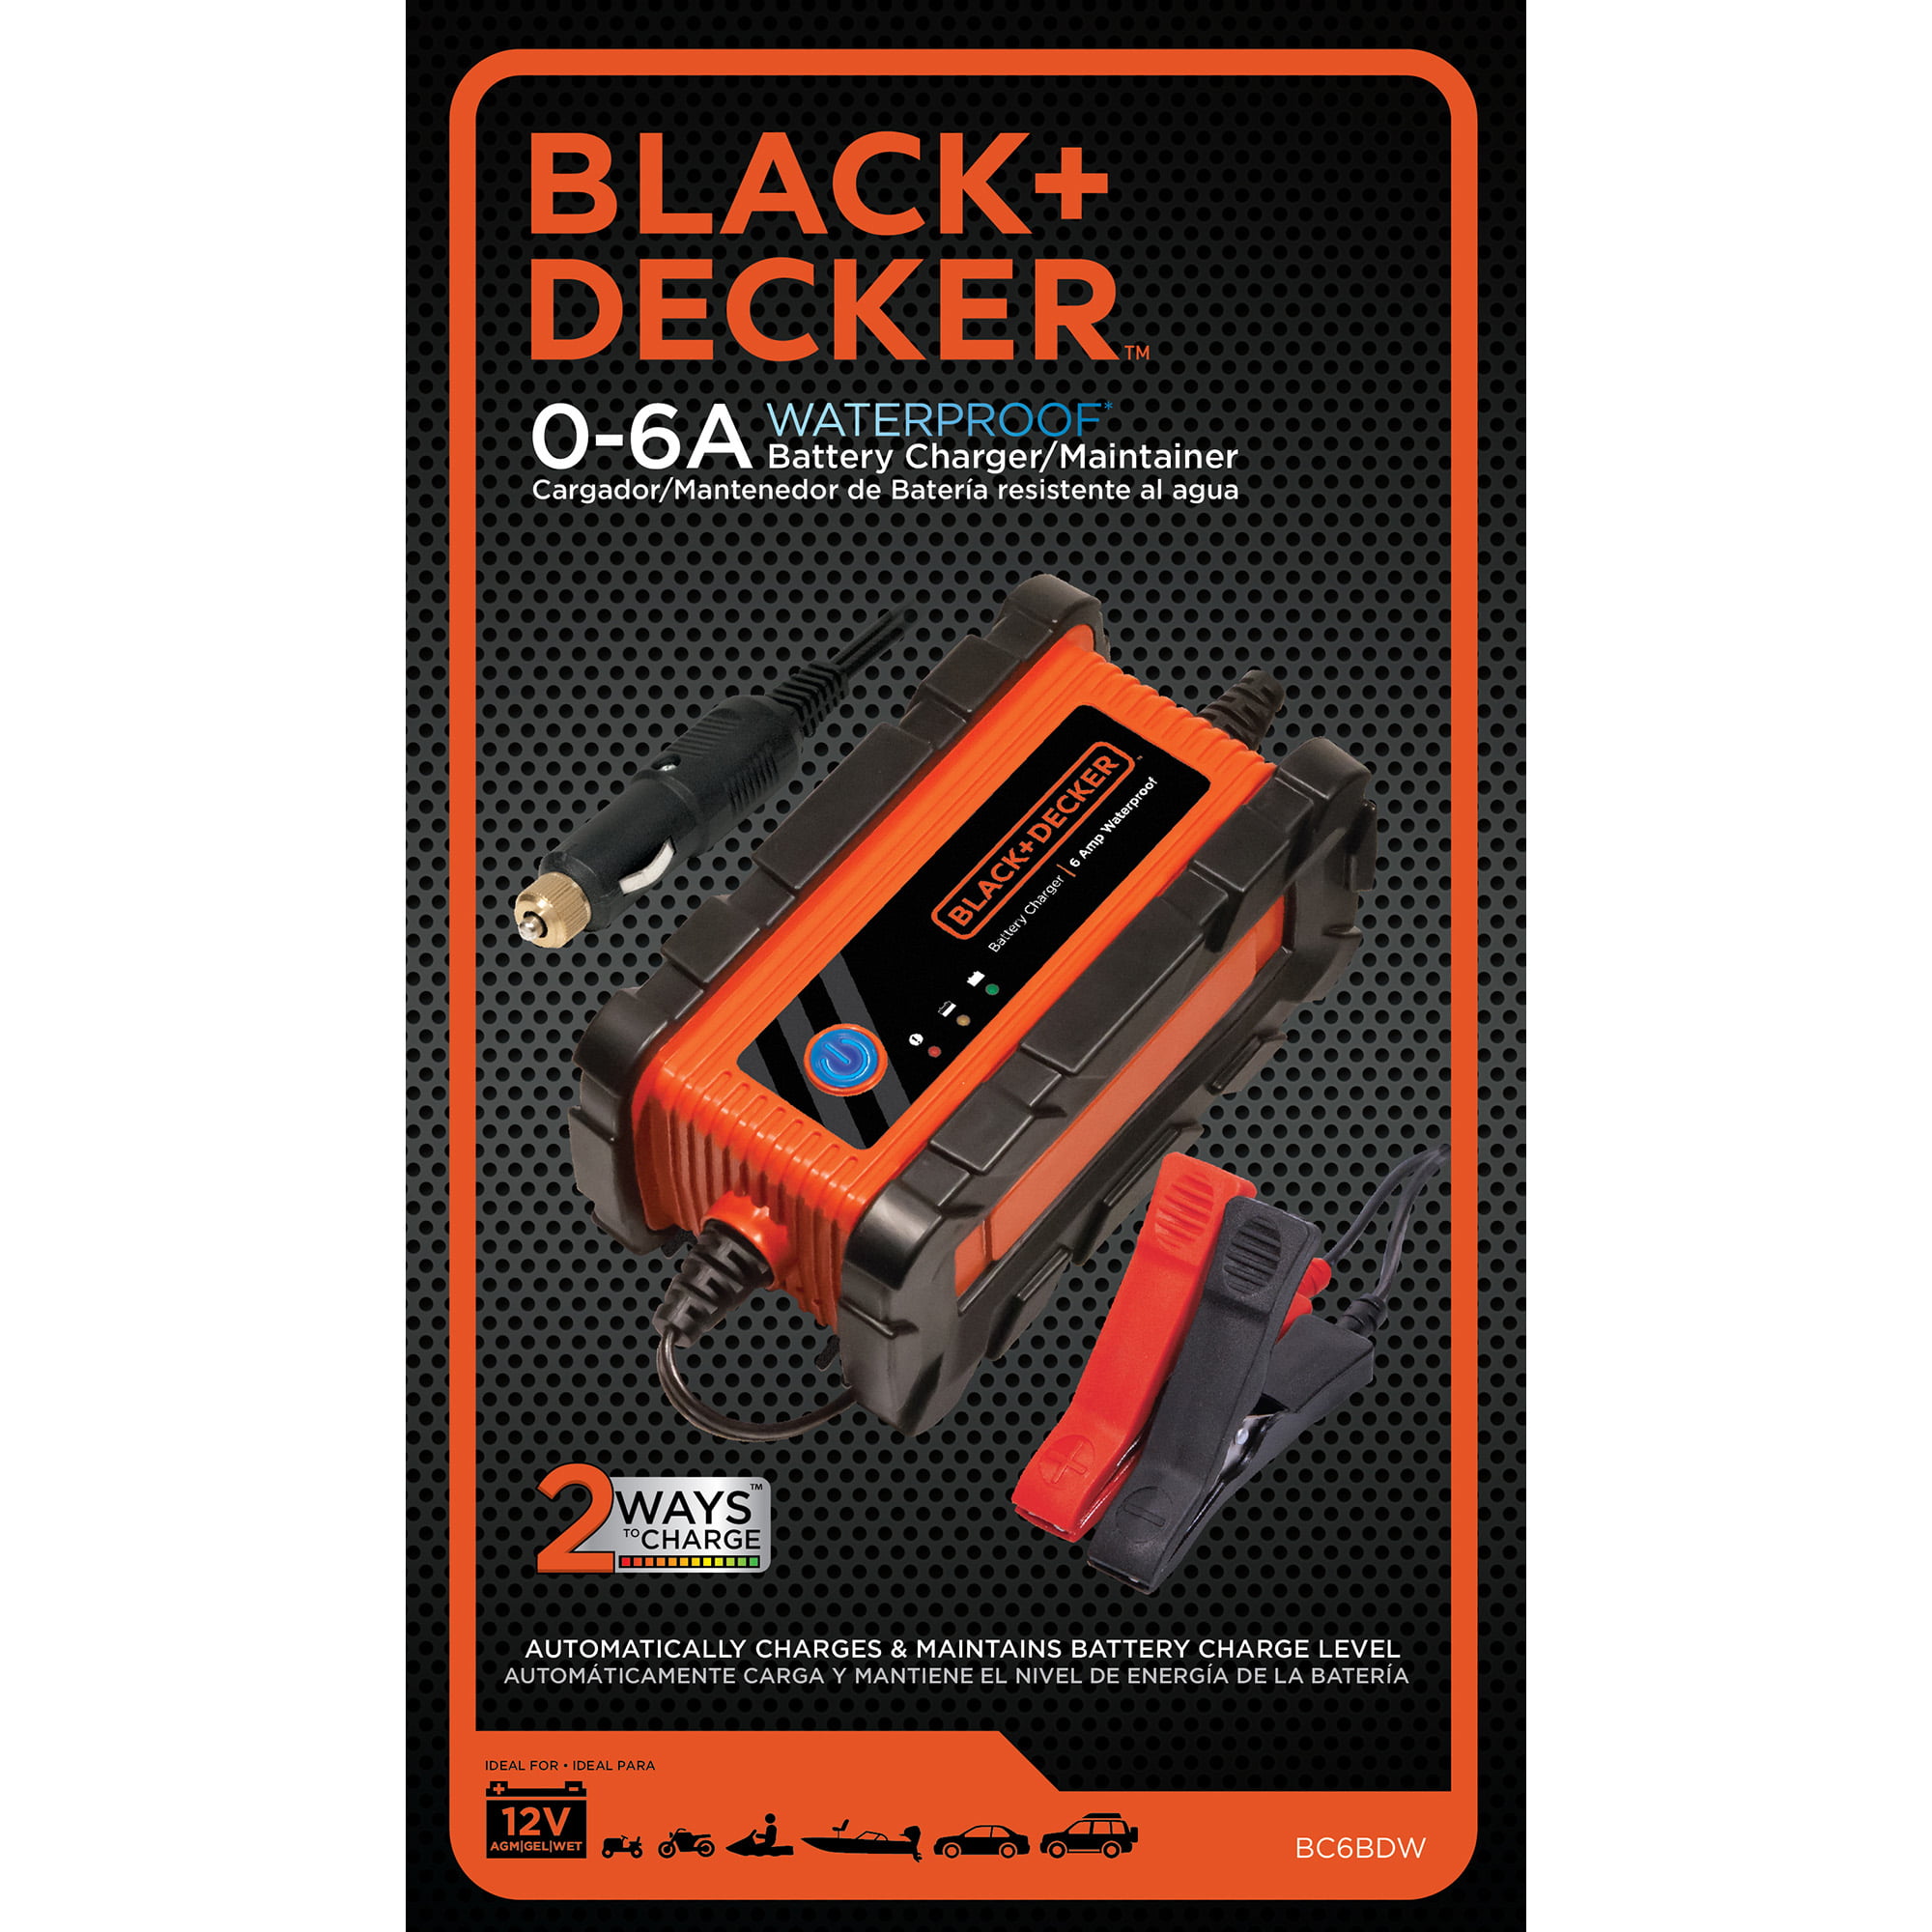 Black+Decker Fully Automatic 6V/12V Battery Charger/Maintainer